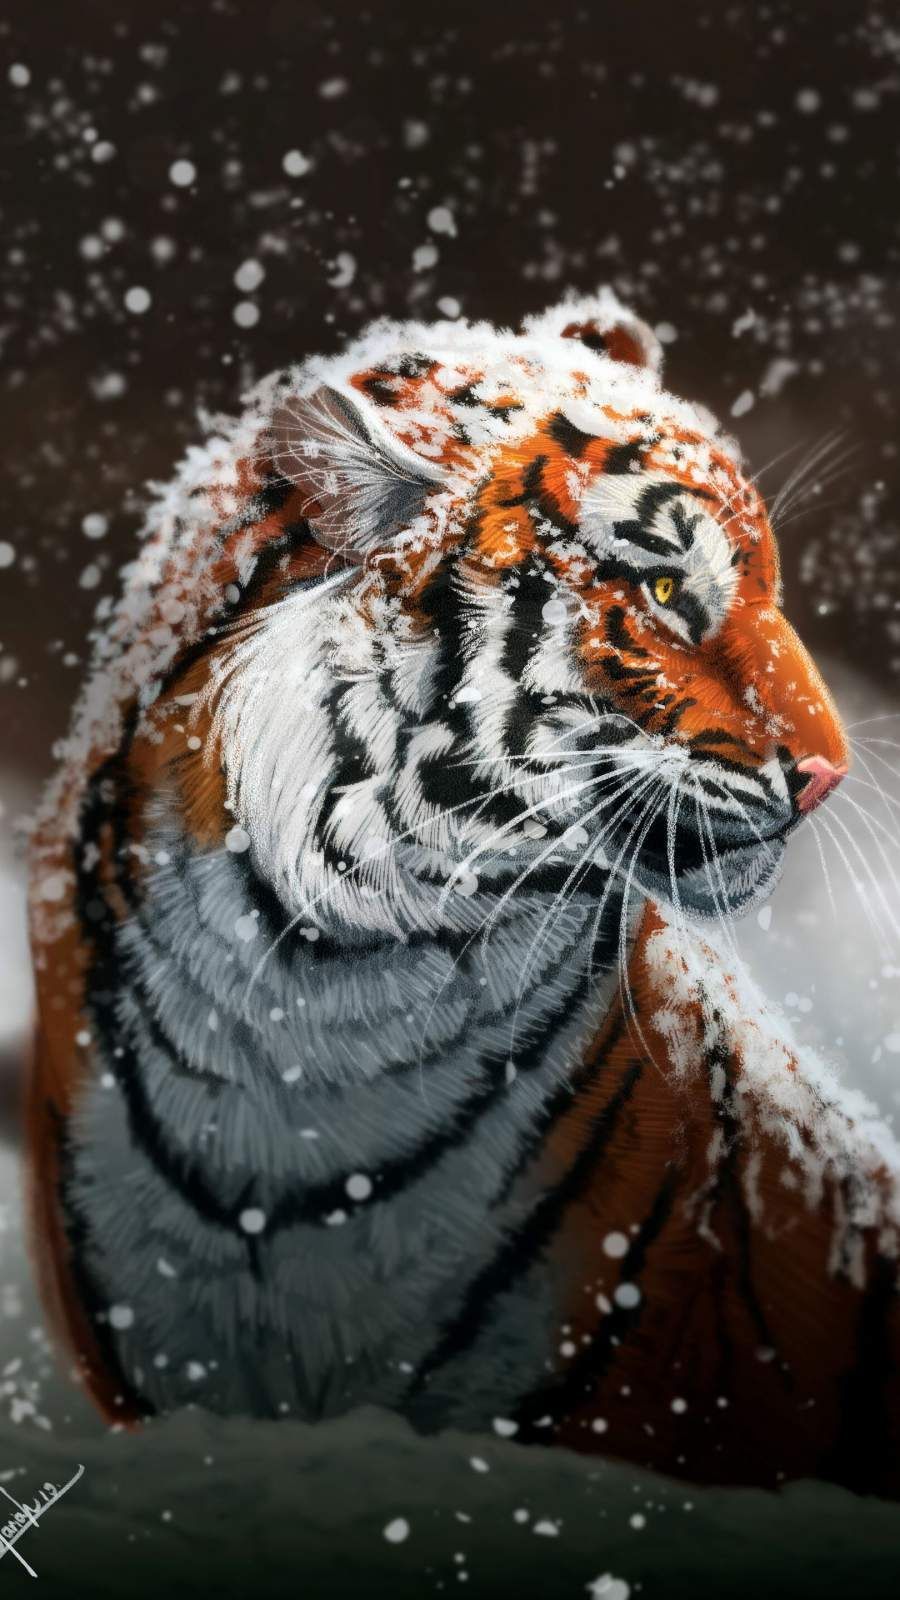 A tiger in the snow - Tiger